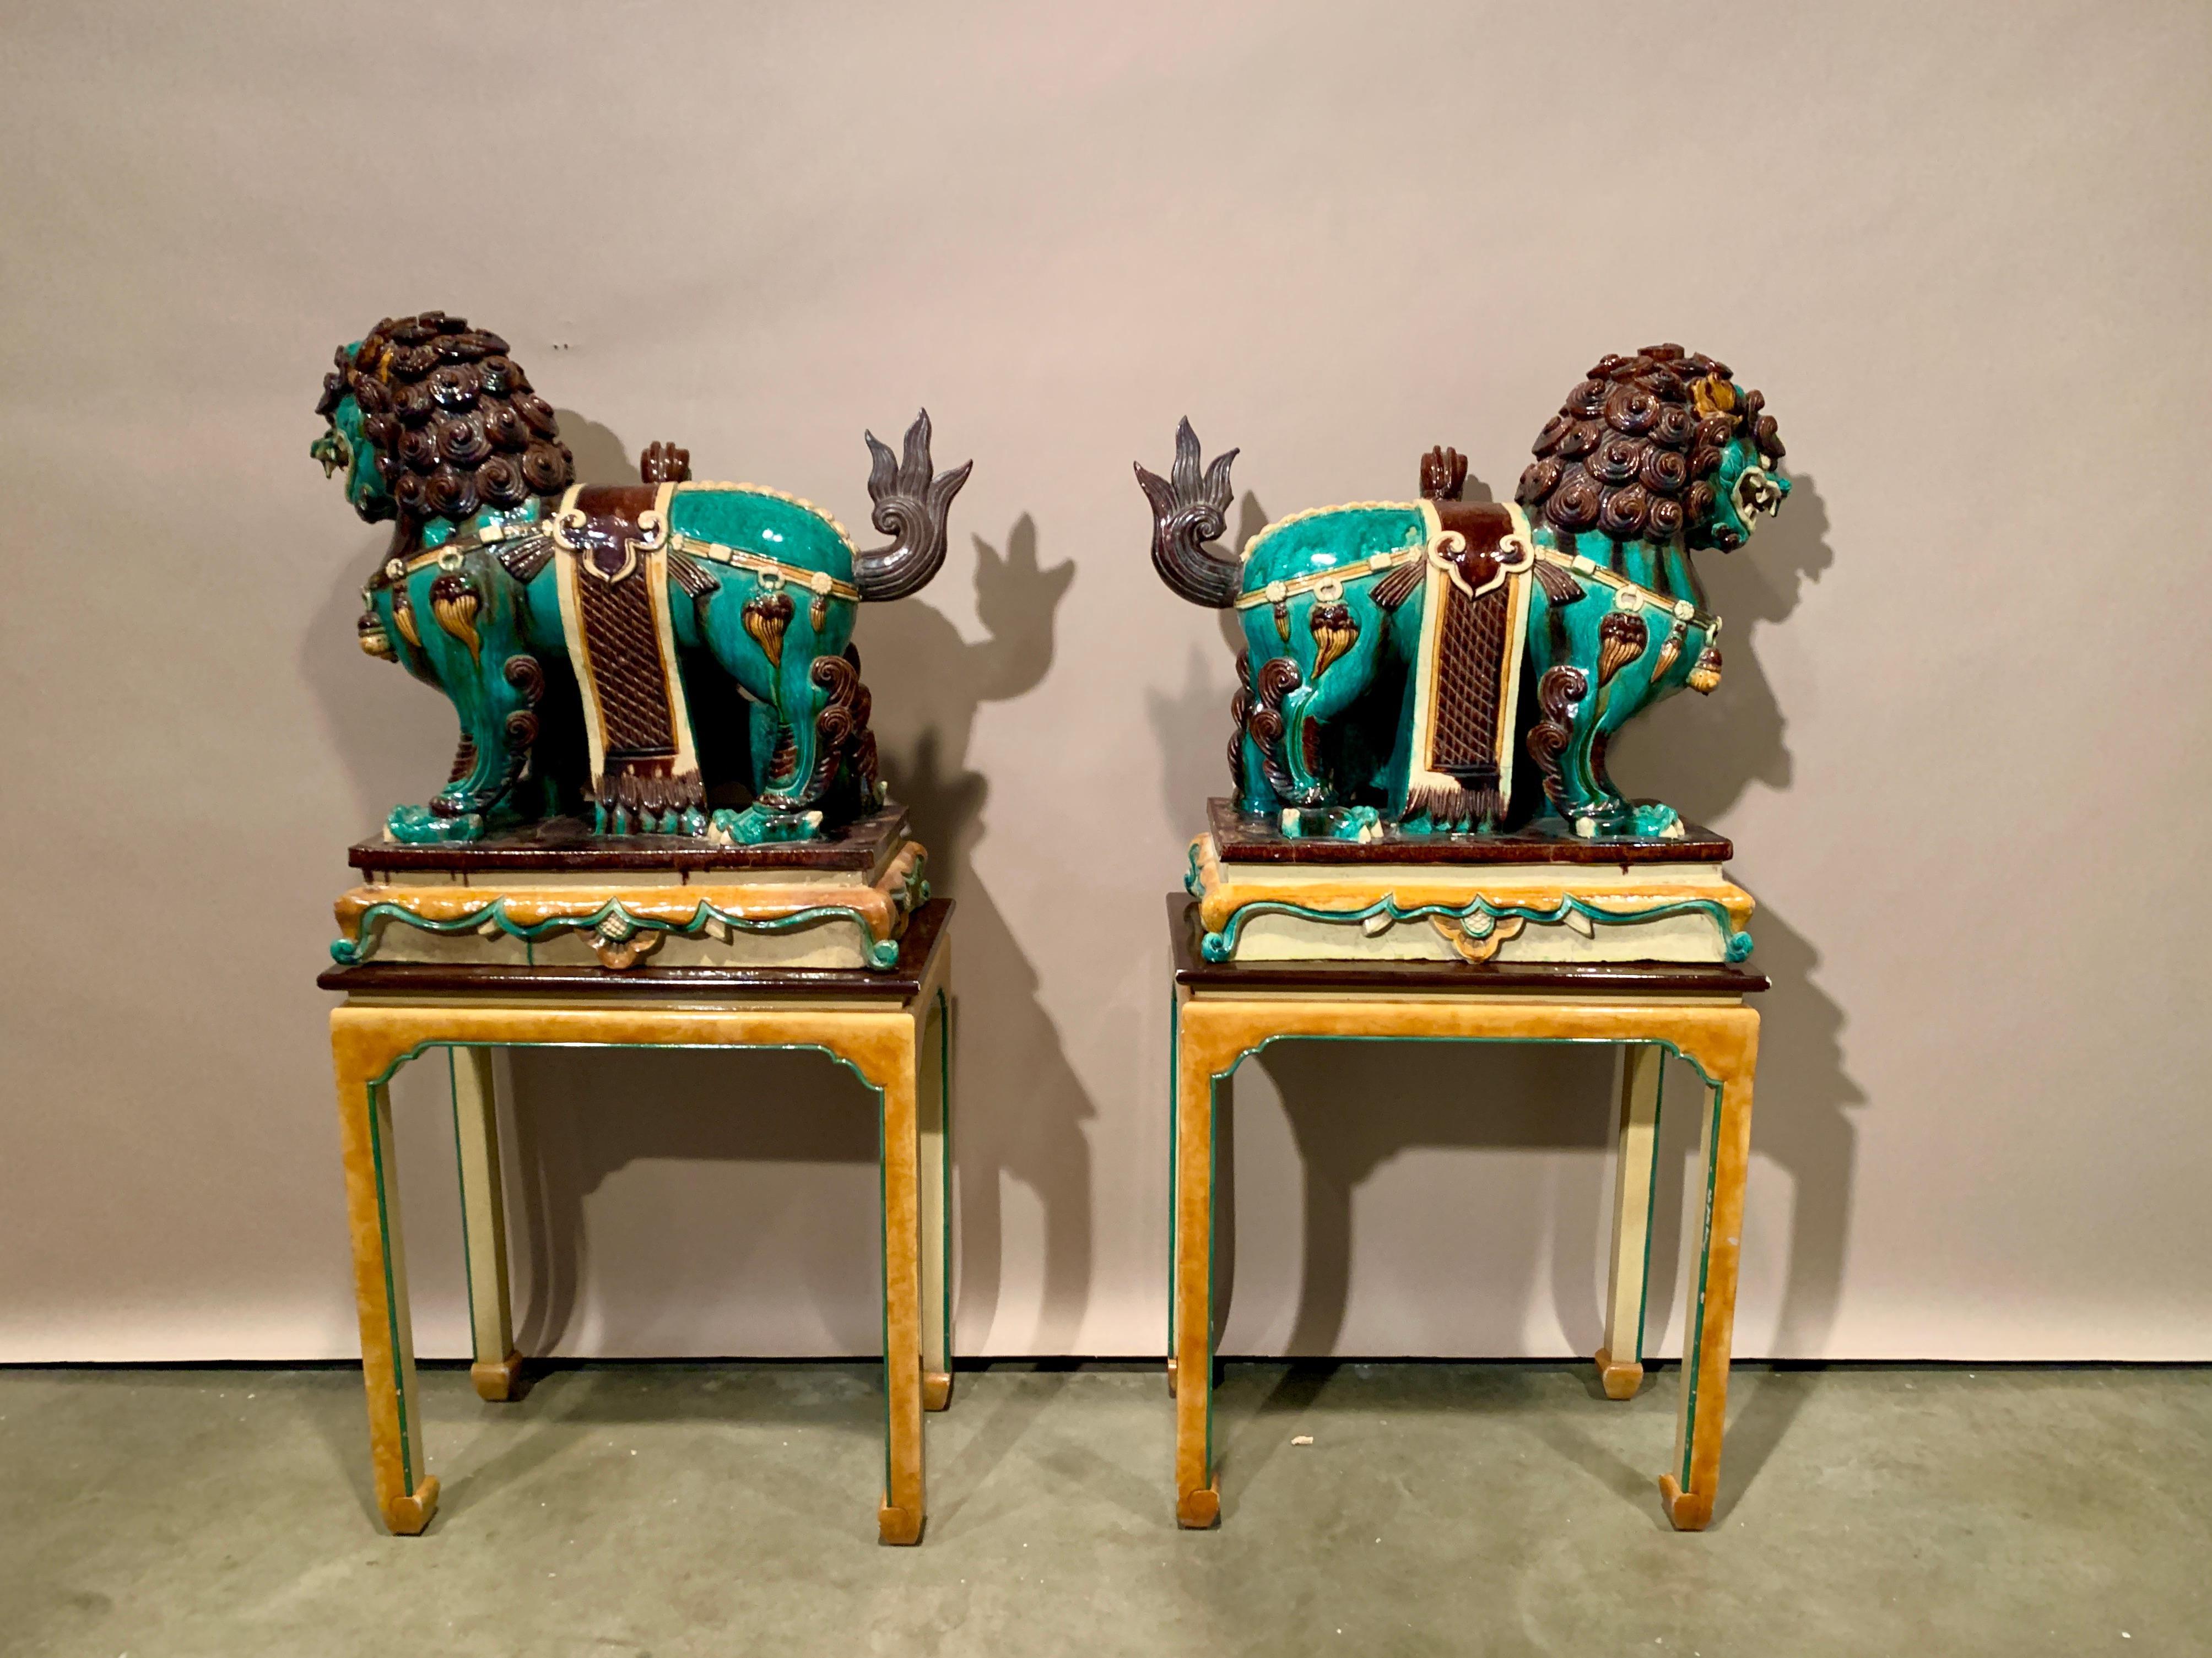 Fired Pair Chinese Ming Dynasty Glazed Buddhist Lions and Attendants, 17th Century For Sale